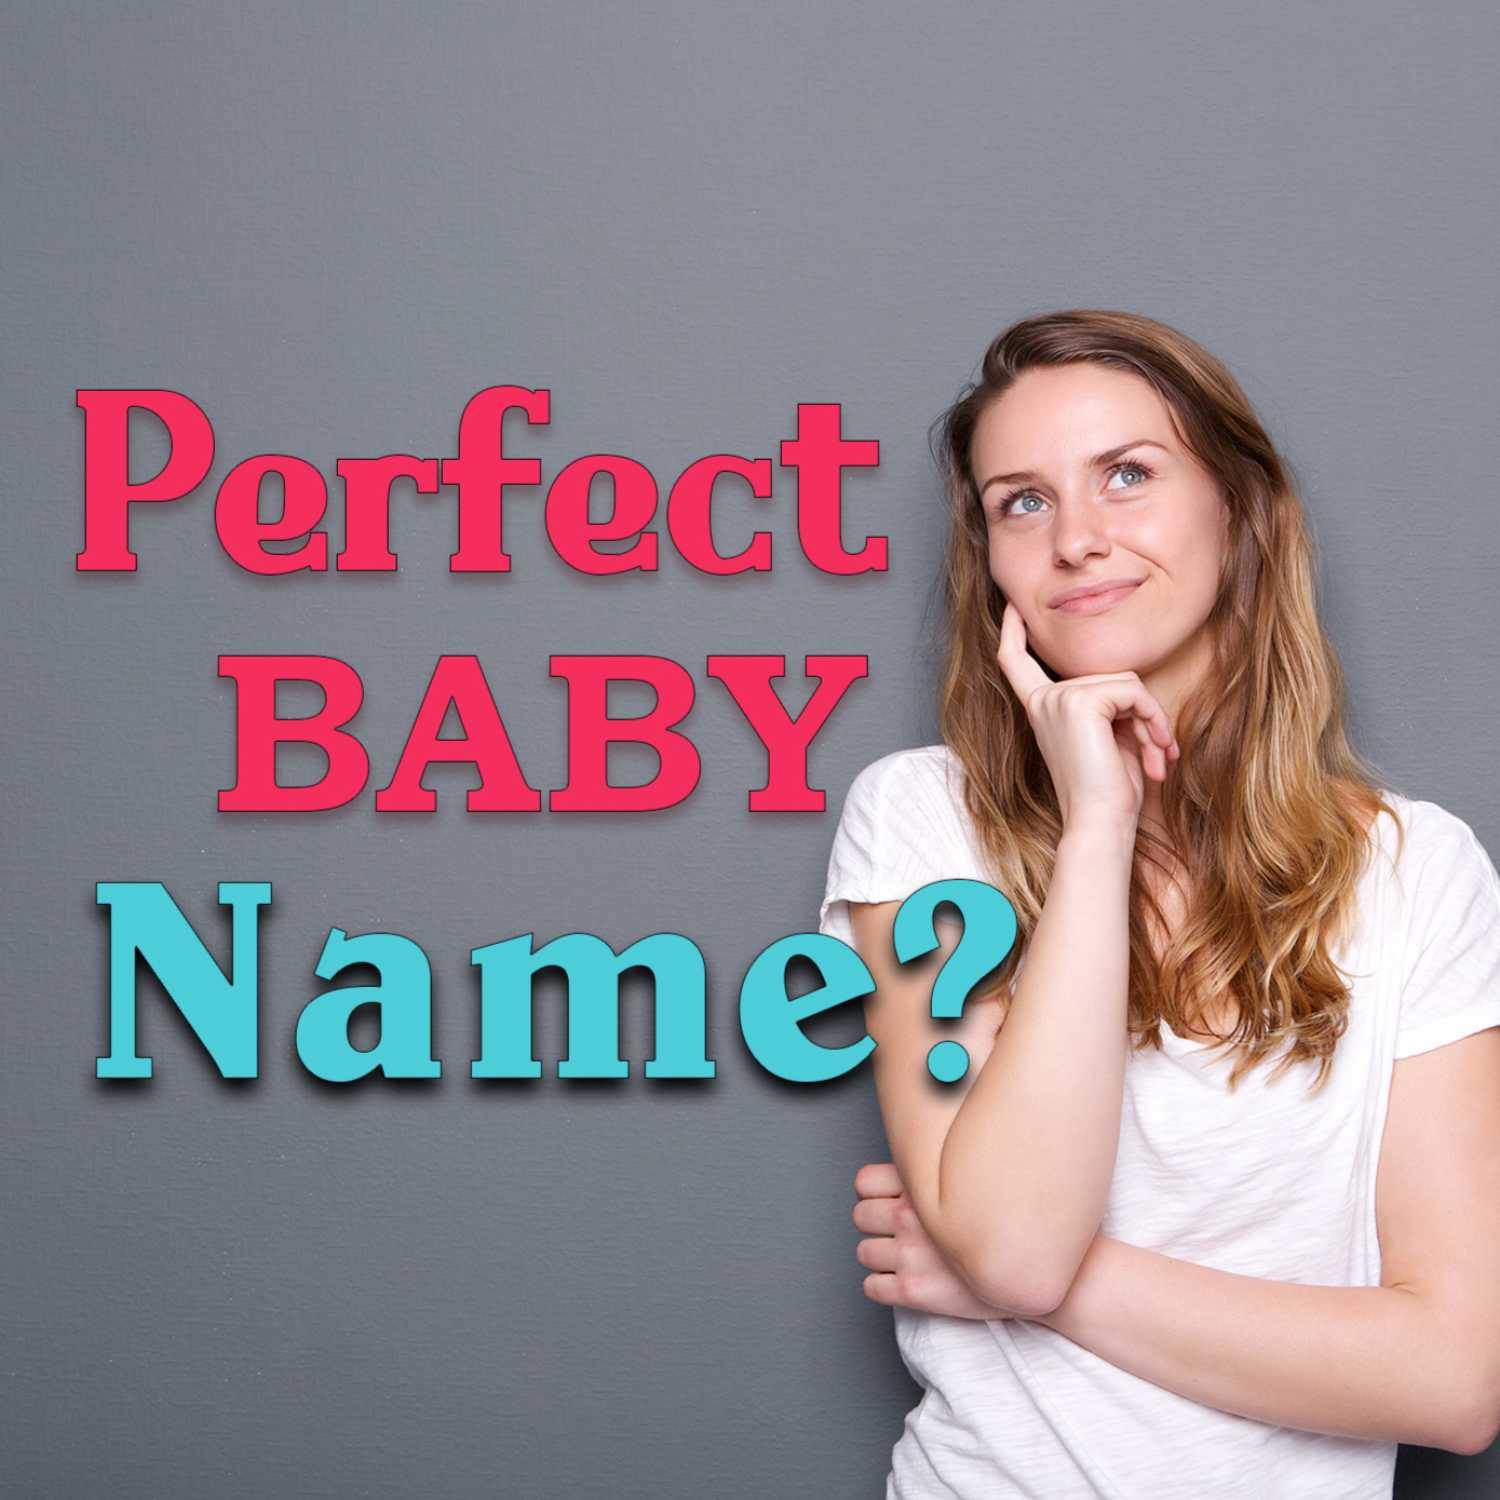 How to choose the perfect baby name?